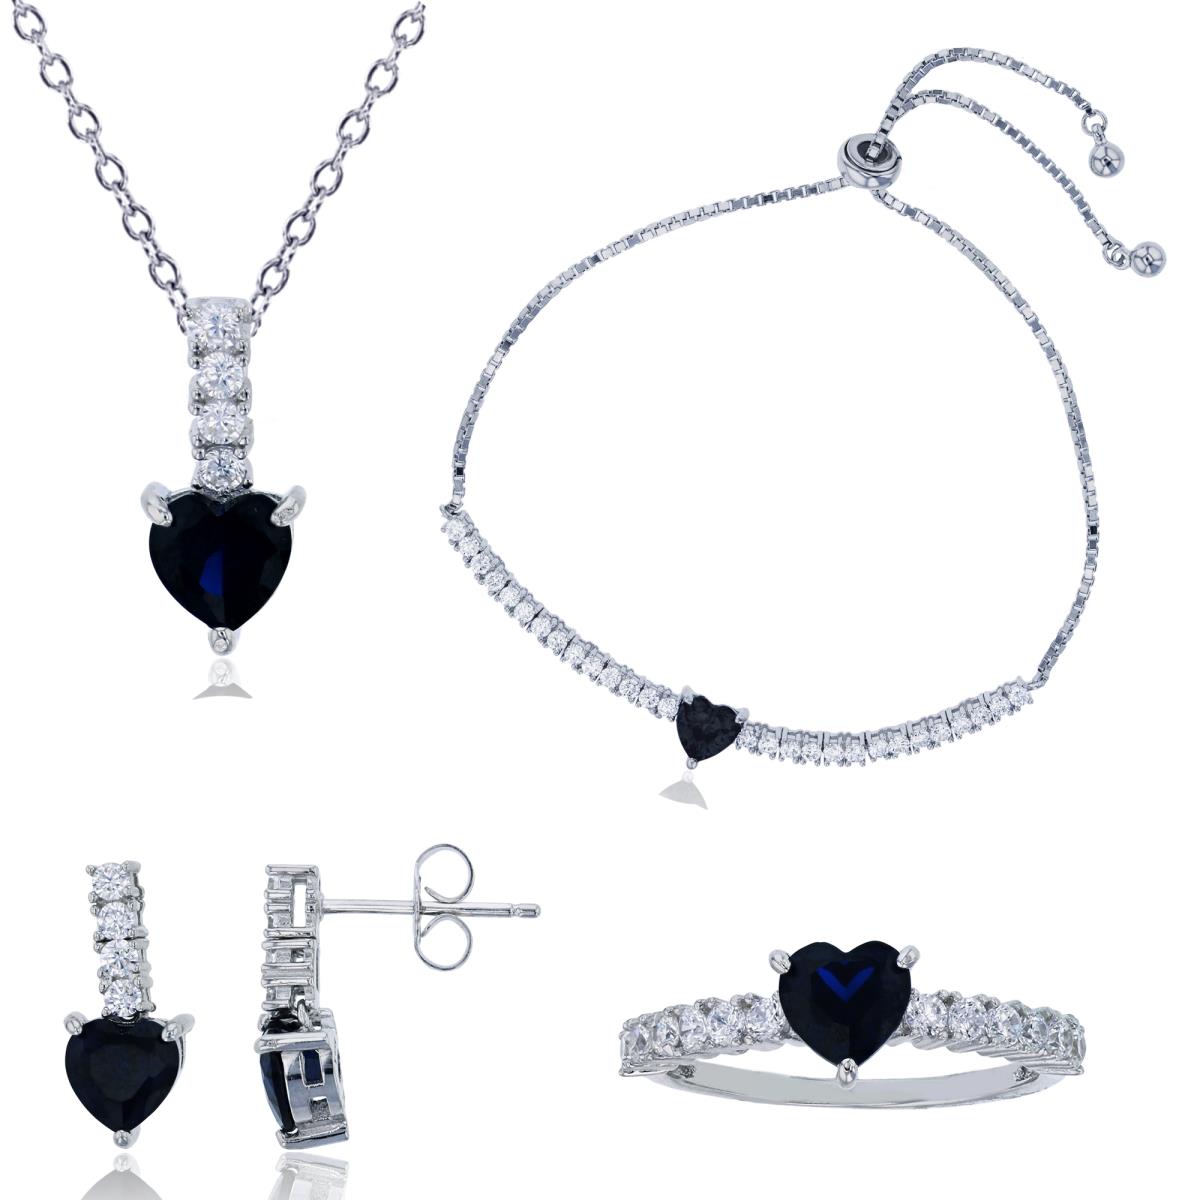 Sterling Silver Rhodium 6mm Sapphire Blue Heart Cut Jewelry Set (Bracelet, Earring, Ring and 18" Necklace)